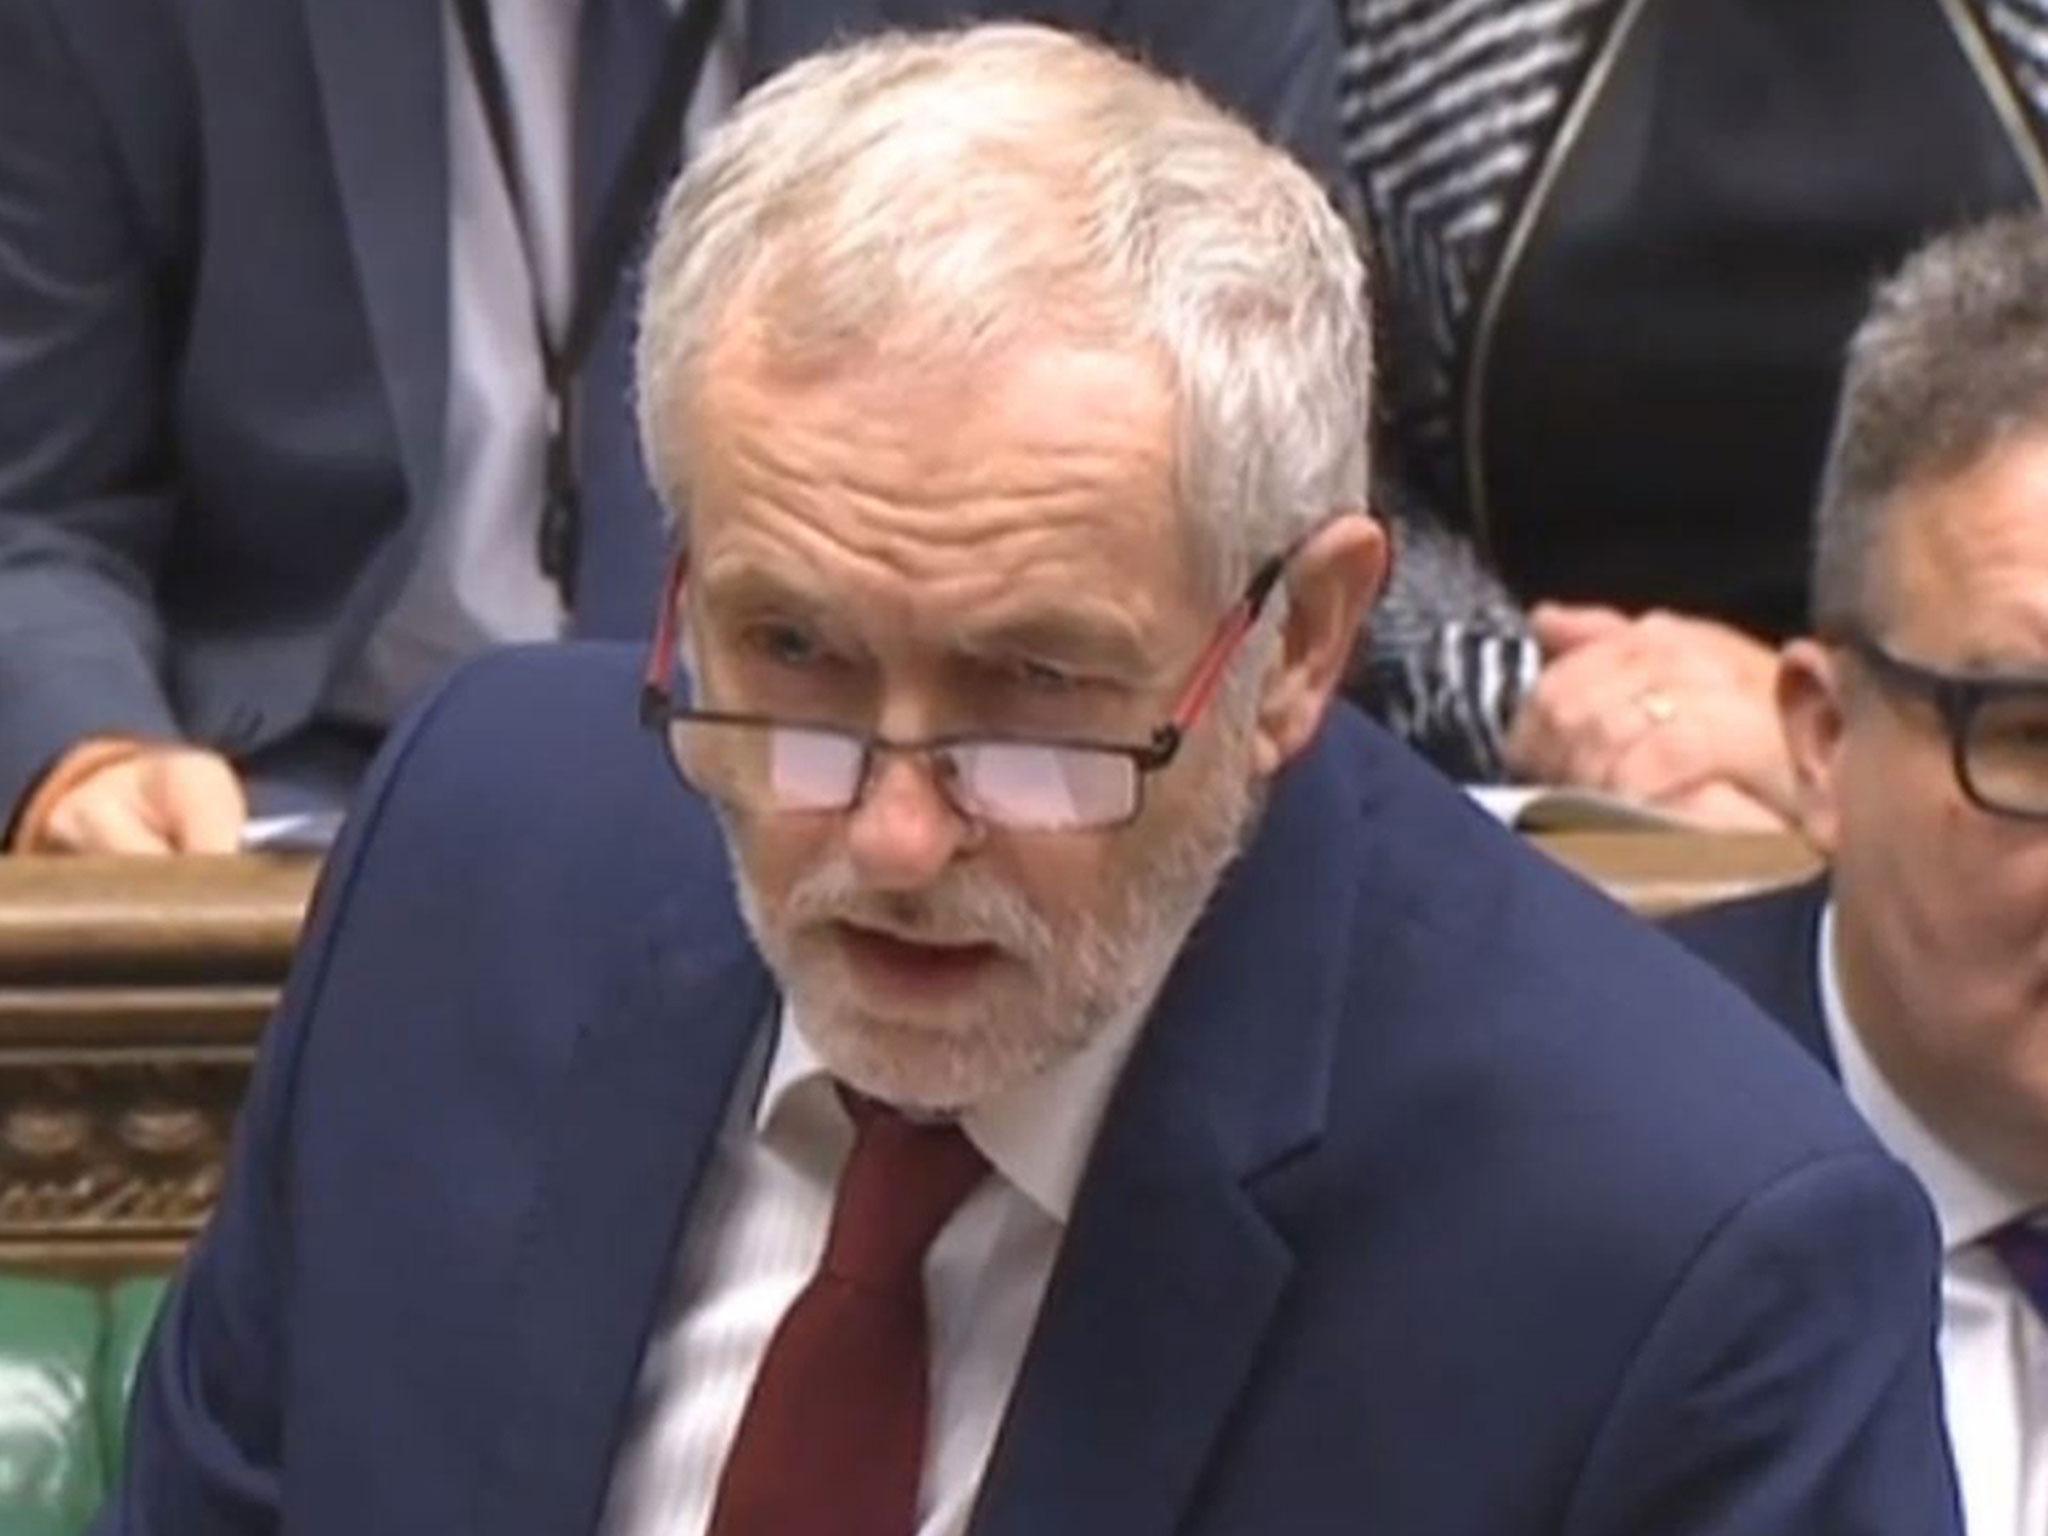 Labour party leader Jeremy Corbyn speaks during Prime Minister's Questions in the House of Commons, London, 23 November, 2016